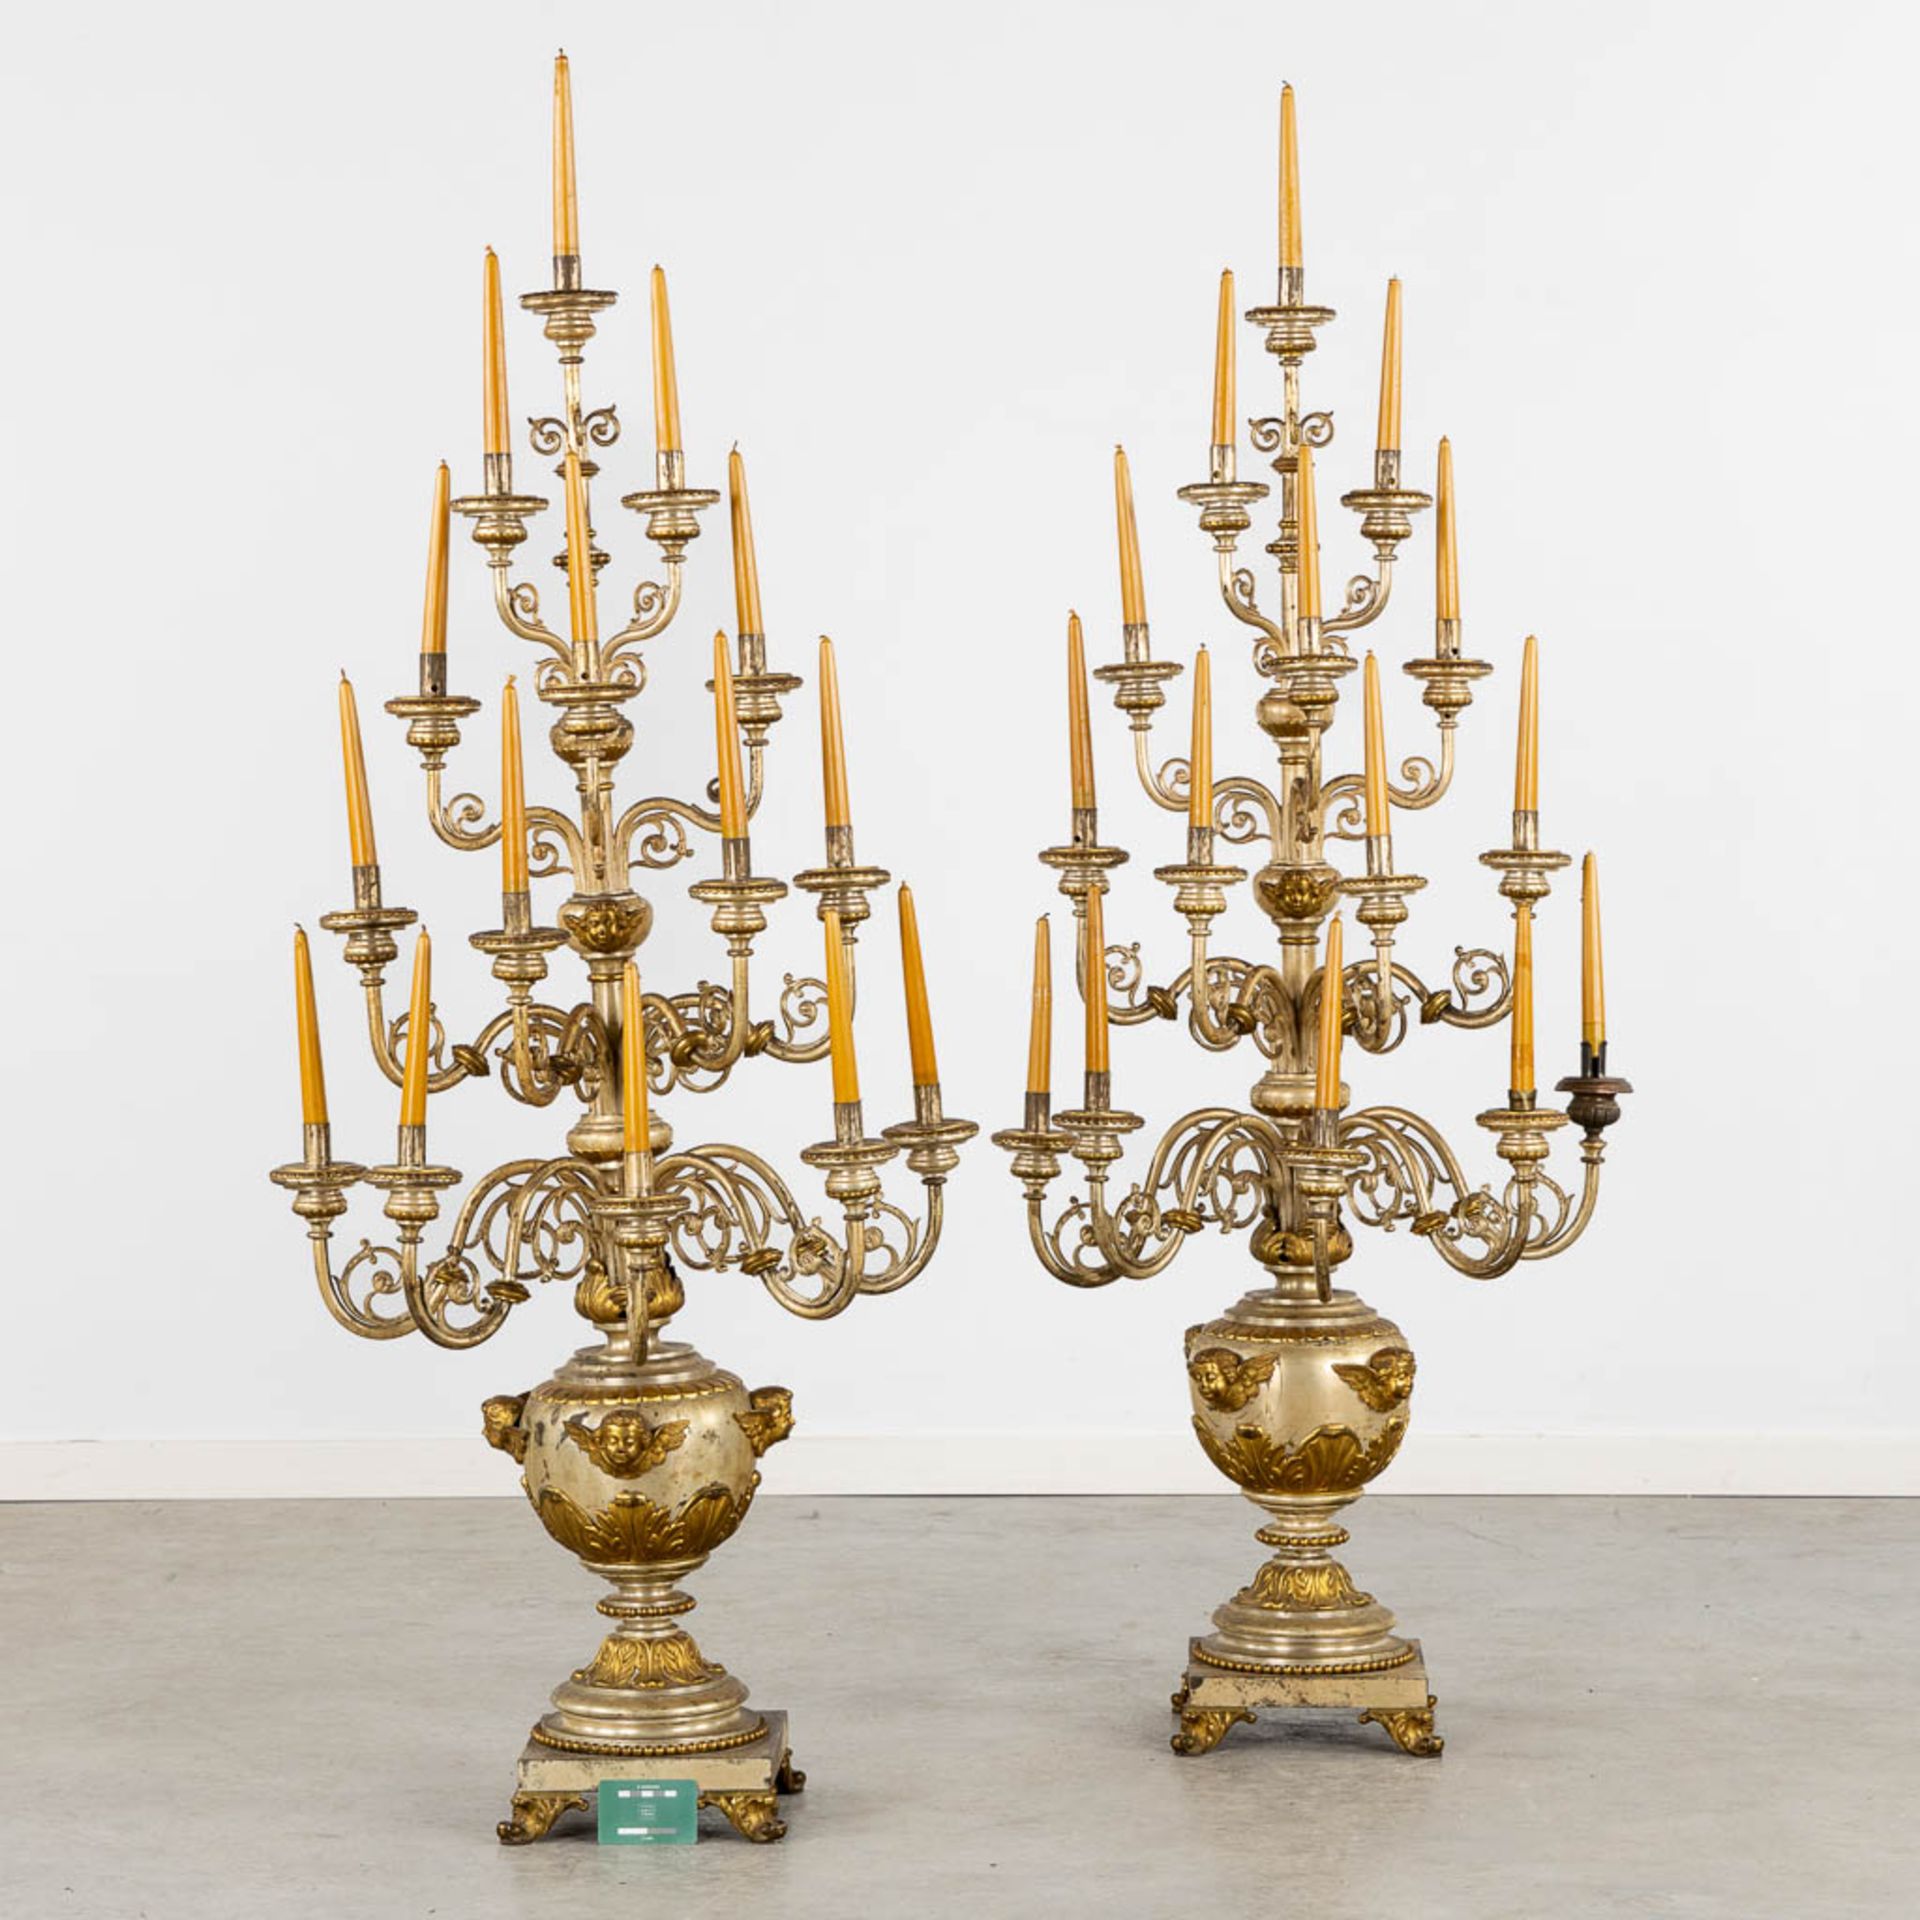 An impressive pair of candelabra, 15 candles, gold and silver-plated metal. (L:44 x W:60 x H:138 cm) - Image 2 of 12